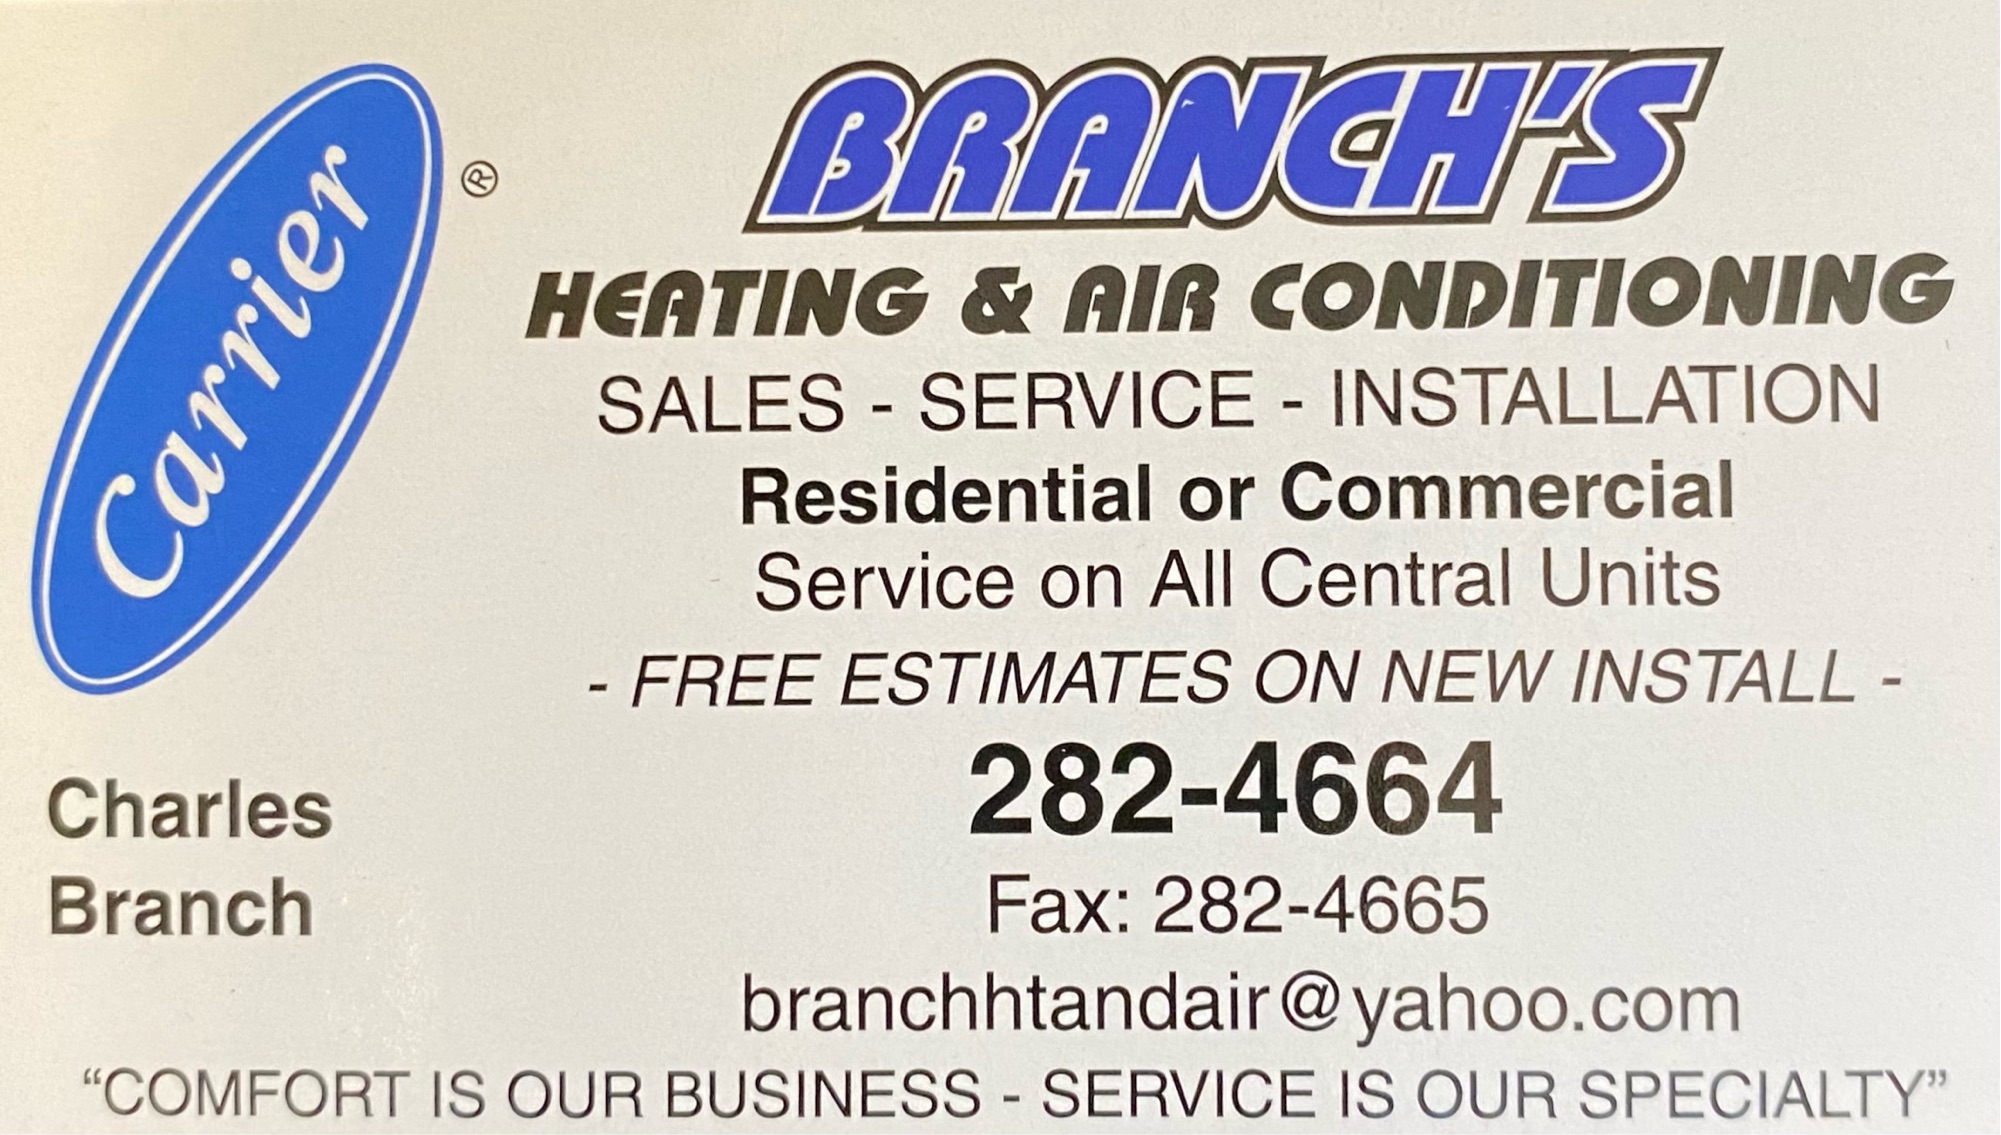 Branch's Heating & Air Conditioning Inc Logo